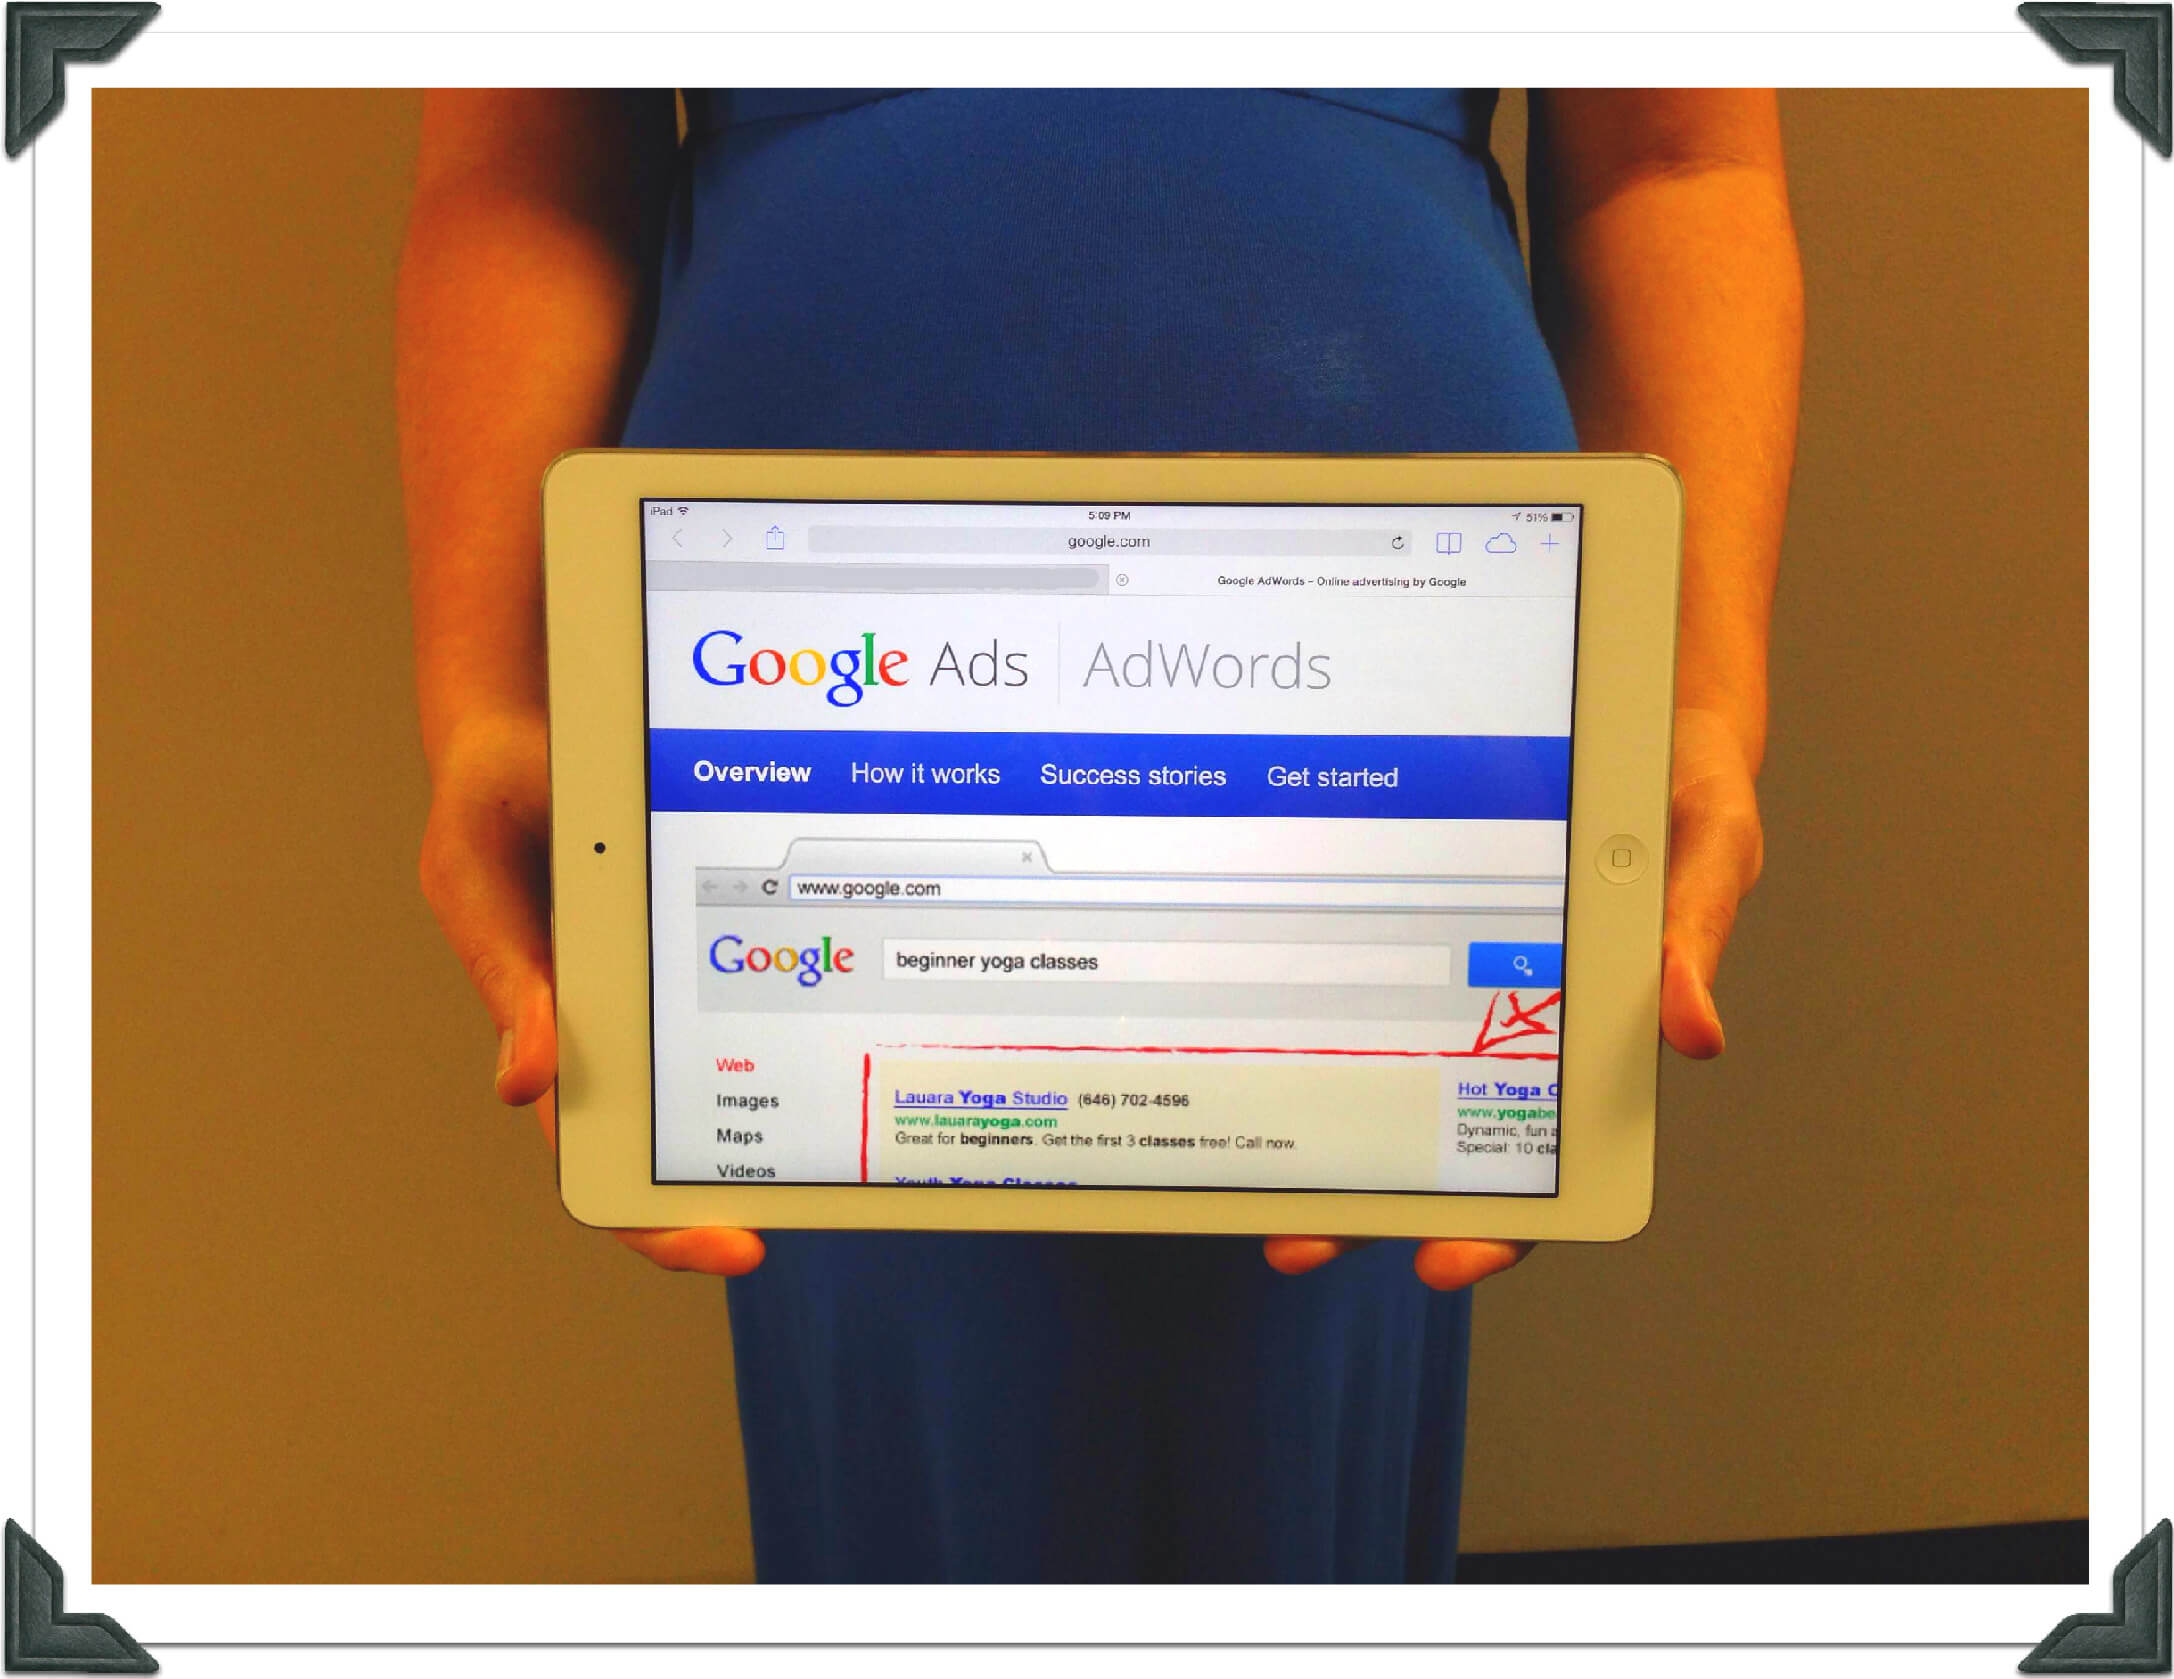 What to Expect When You’re Expecting Google AdWords Results